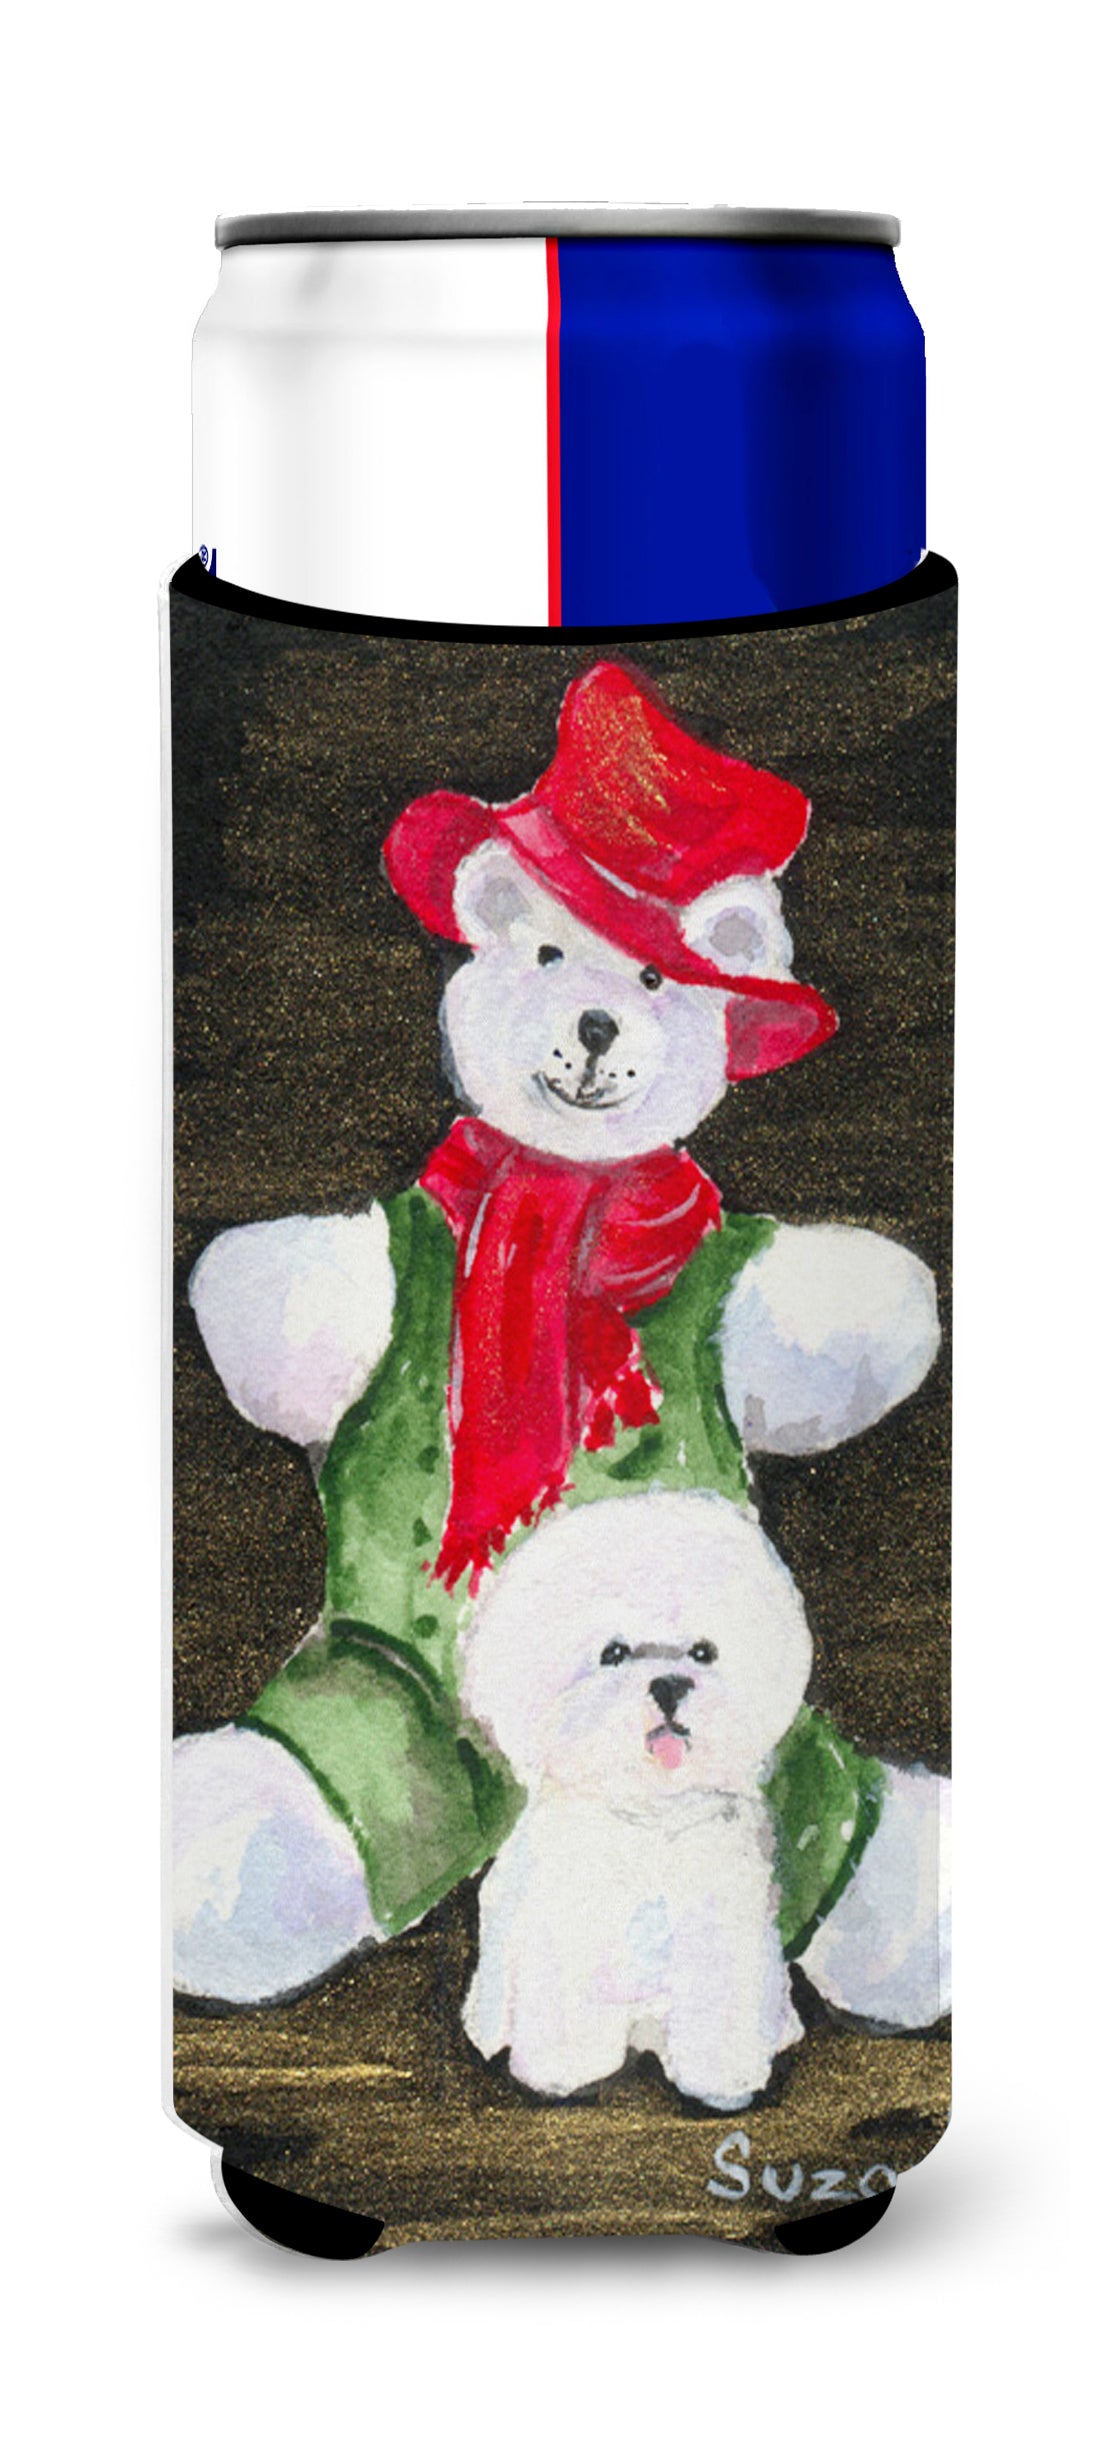 Bichon Frise with Teddy Bear Ultra Beverage Insulators for slim cans SS8948MUK